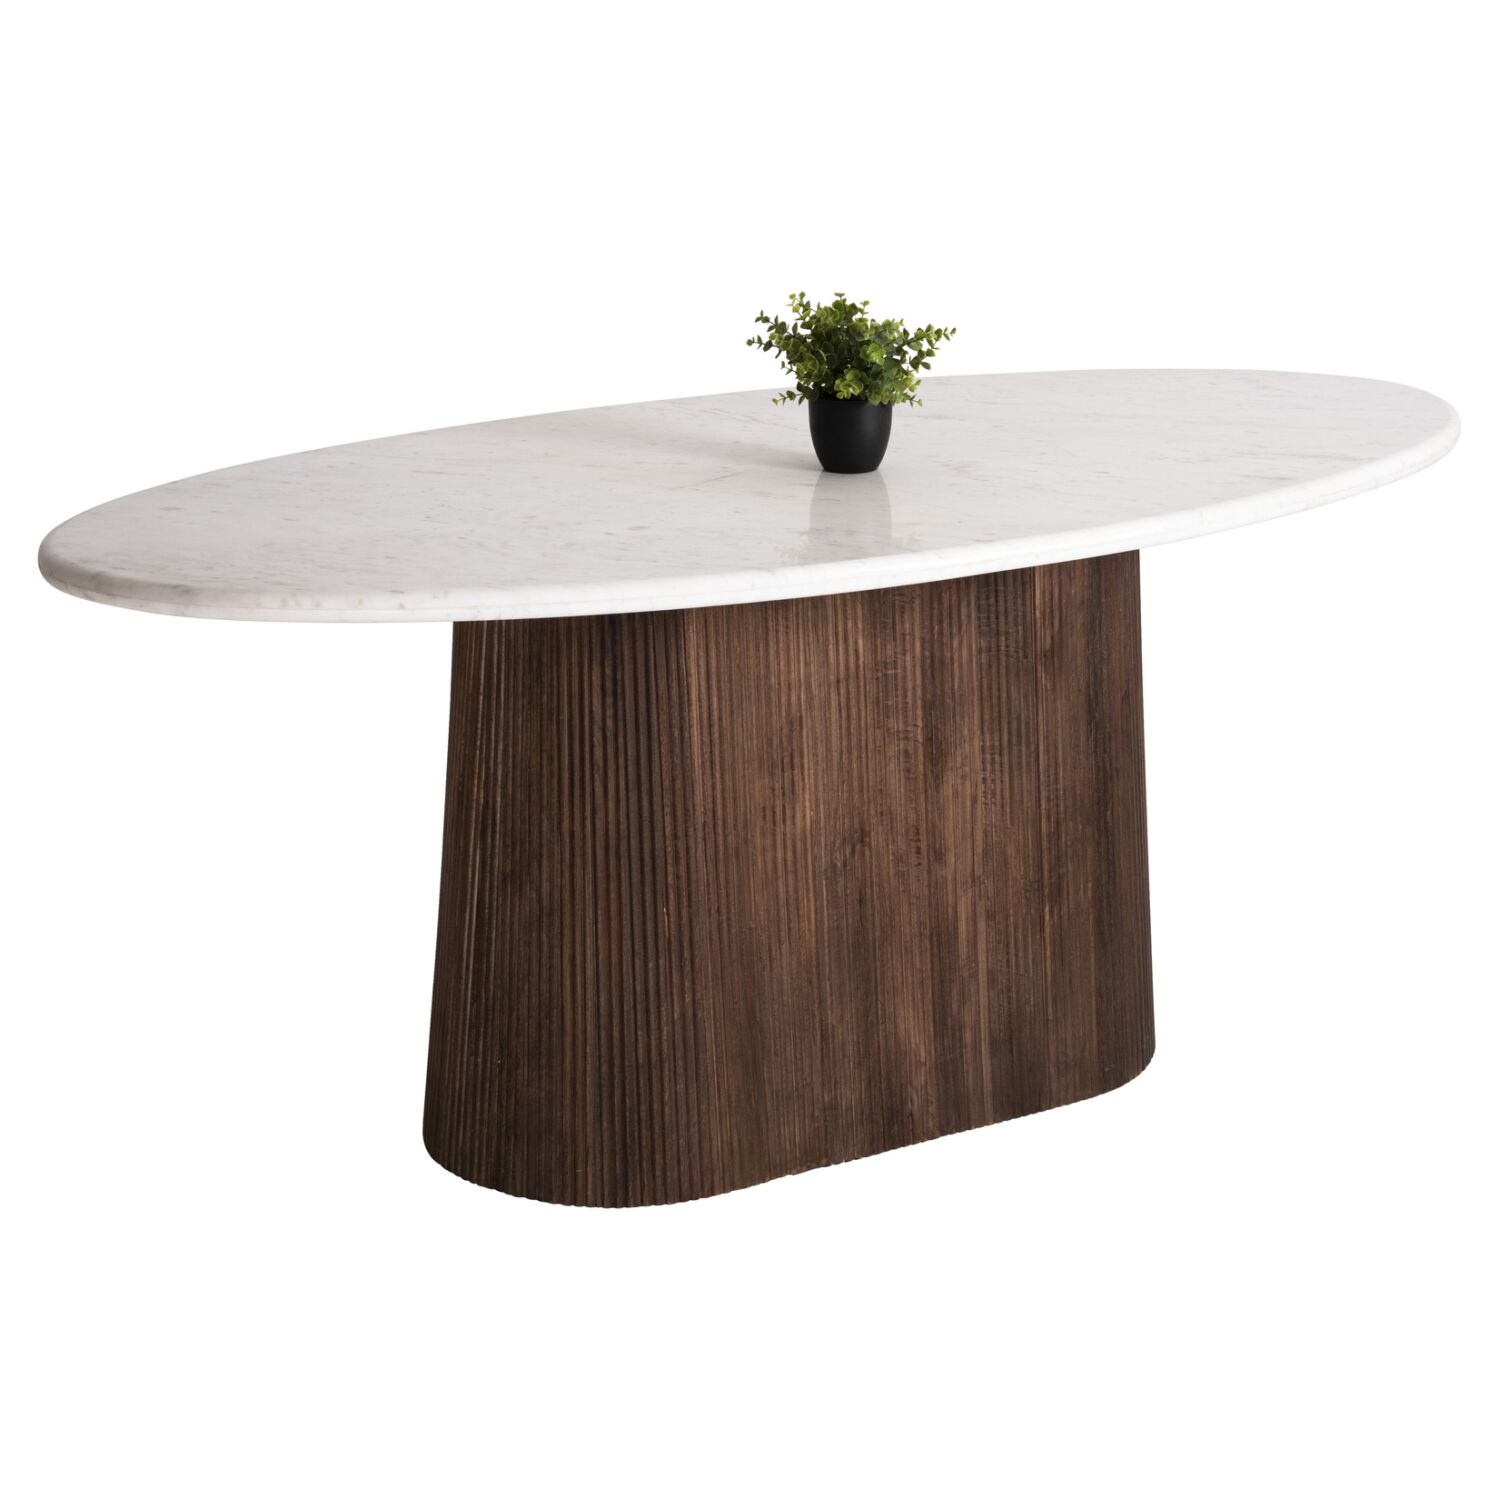 DINING TABLE OVAL PURGER HM9715 SOLID MANGO WOOD-WHITE MARBLE 180x90x76Hcm.